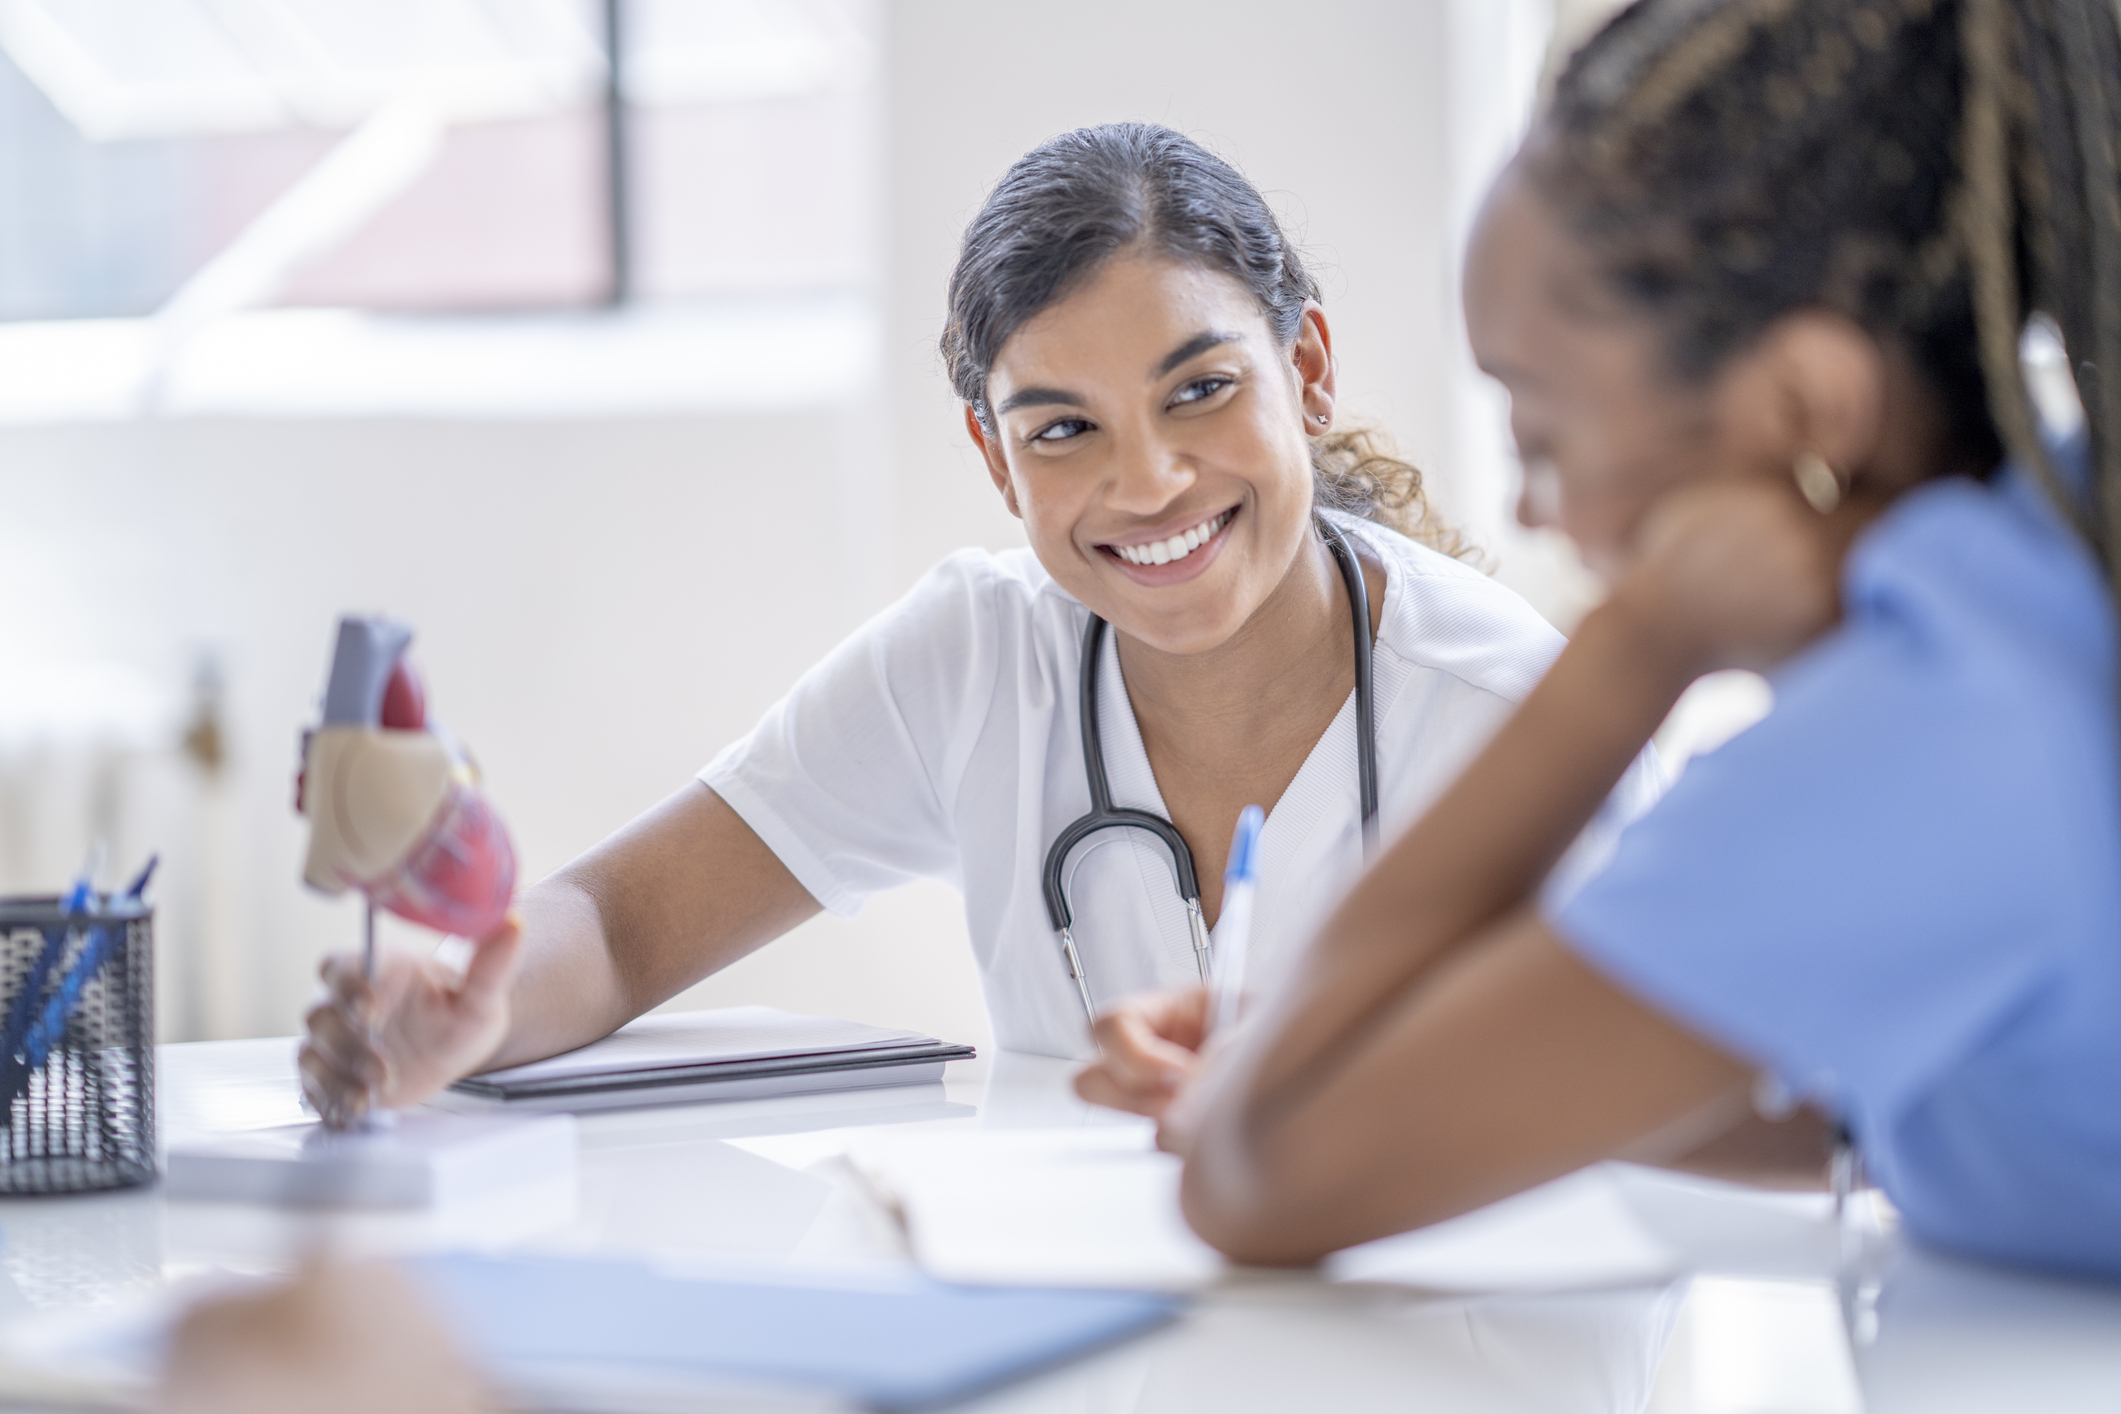 How to Prepare for the NCLEX-PN